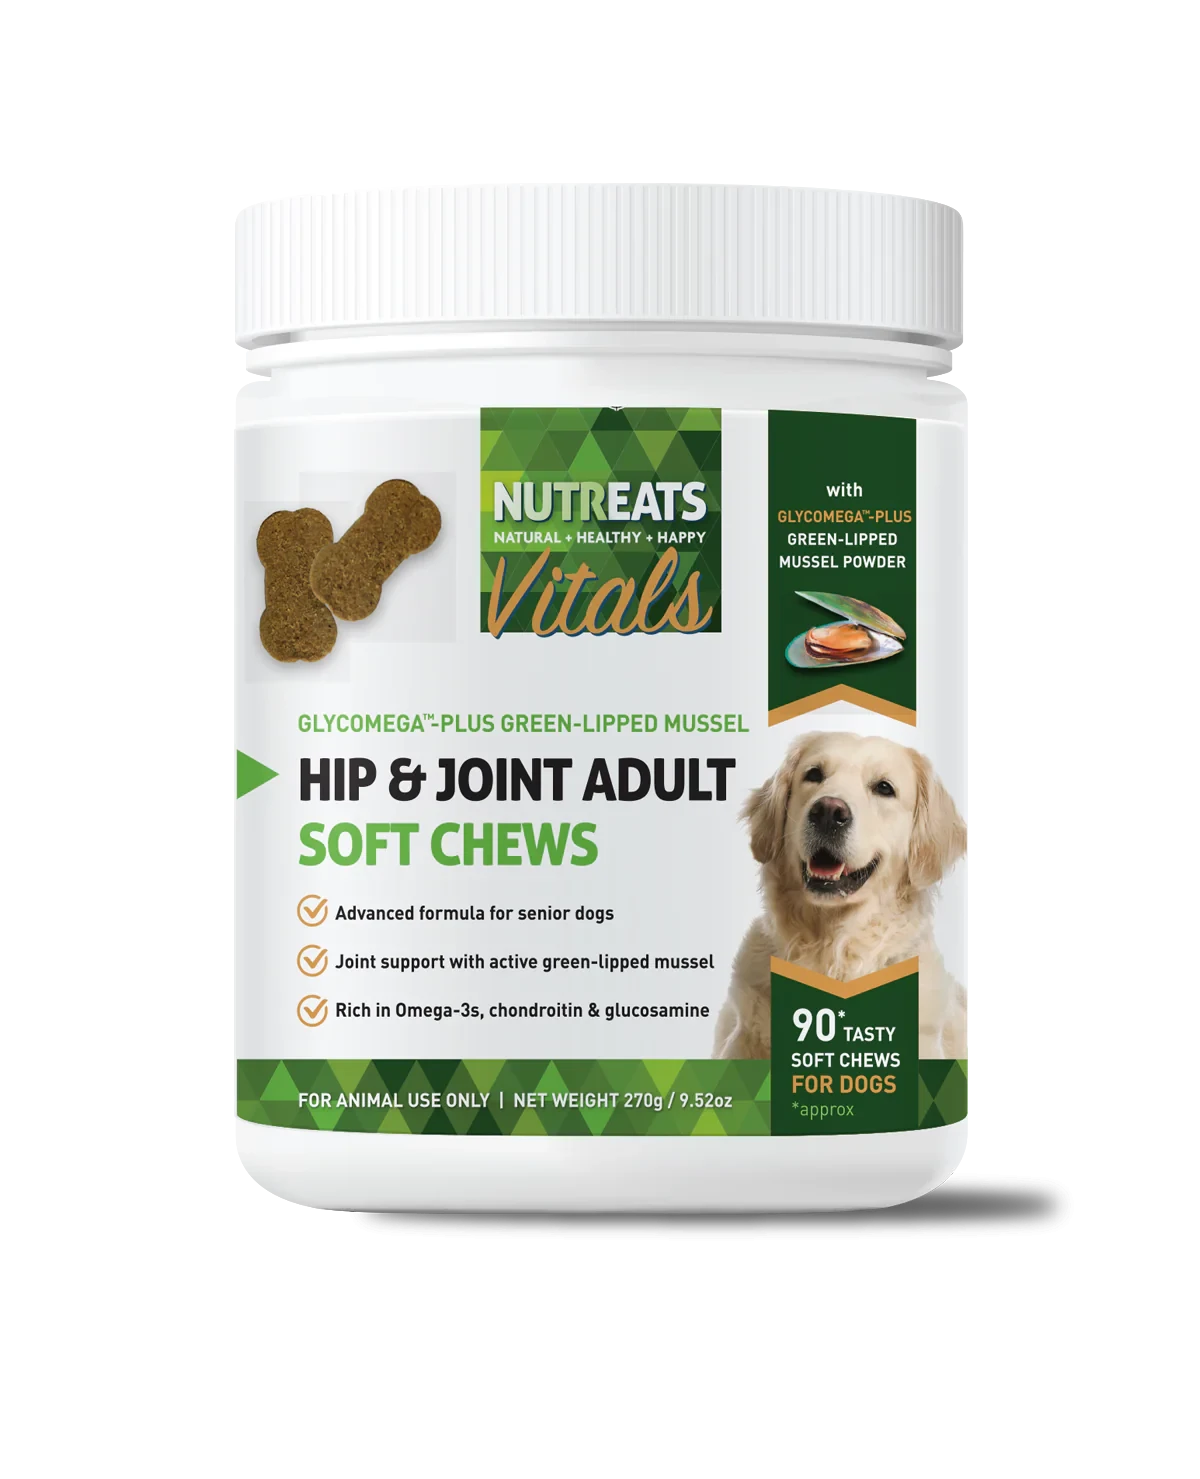 Hip & Joint Adult Soft Chews for dogs